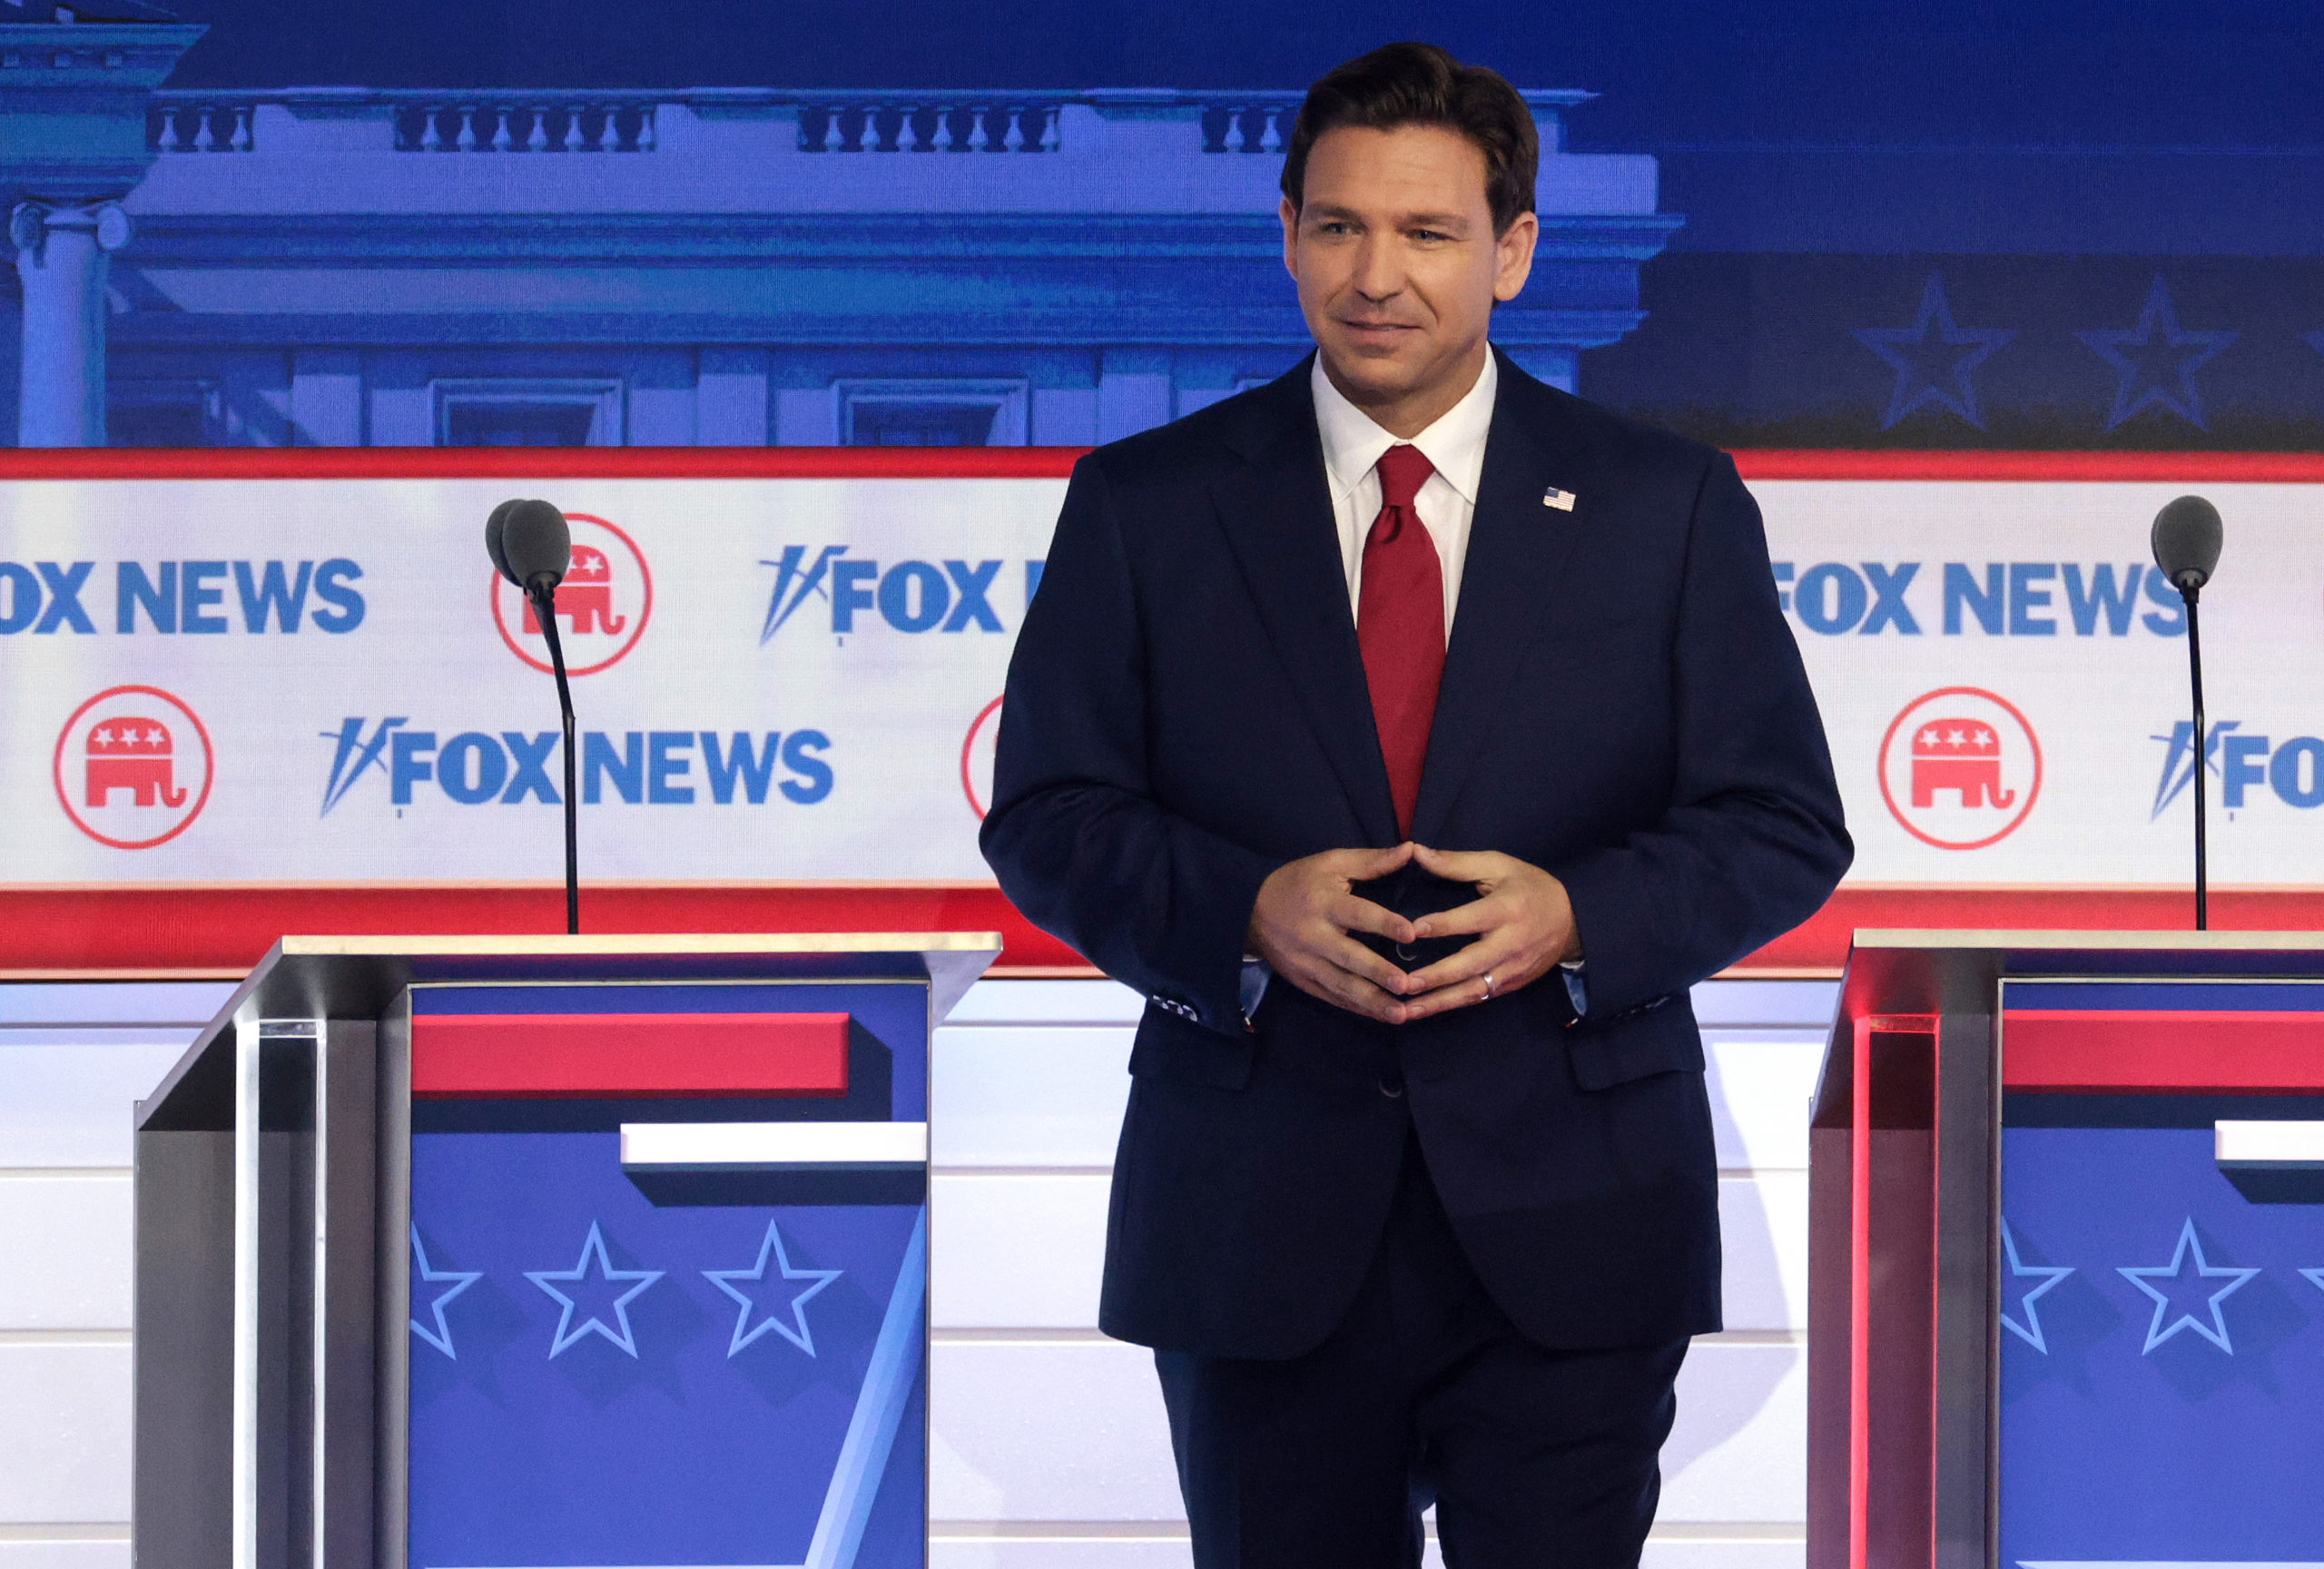 MILWAUKEE, WISCONSIN - AUGUST 23: Republican presidential candidate, Florida Gov. Ron DeSantis participates in the first debate of the GOP primary season hosted by FOX News at the Fiserv Forum on August 23, 2023 in Milwaukee, Wisconsin. Eight presidential hopefuls squared off in the first Republican debate as former U.S. President Donald Trump, currently facing indictments in four locations, declined to participate in the event. (Photo by Win McNamee/Getty Images)